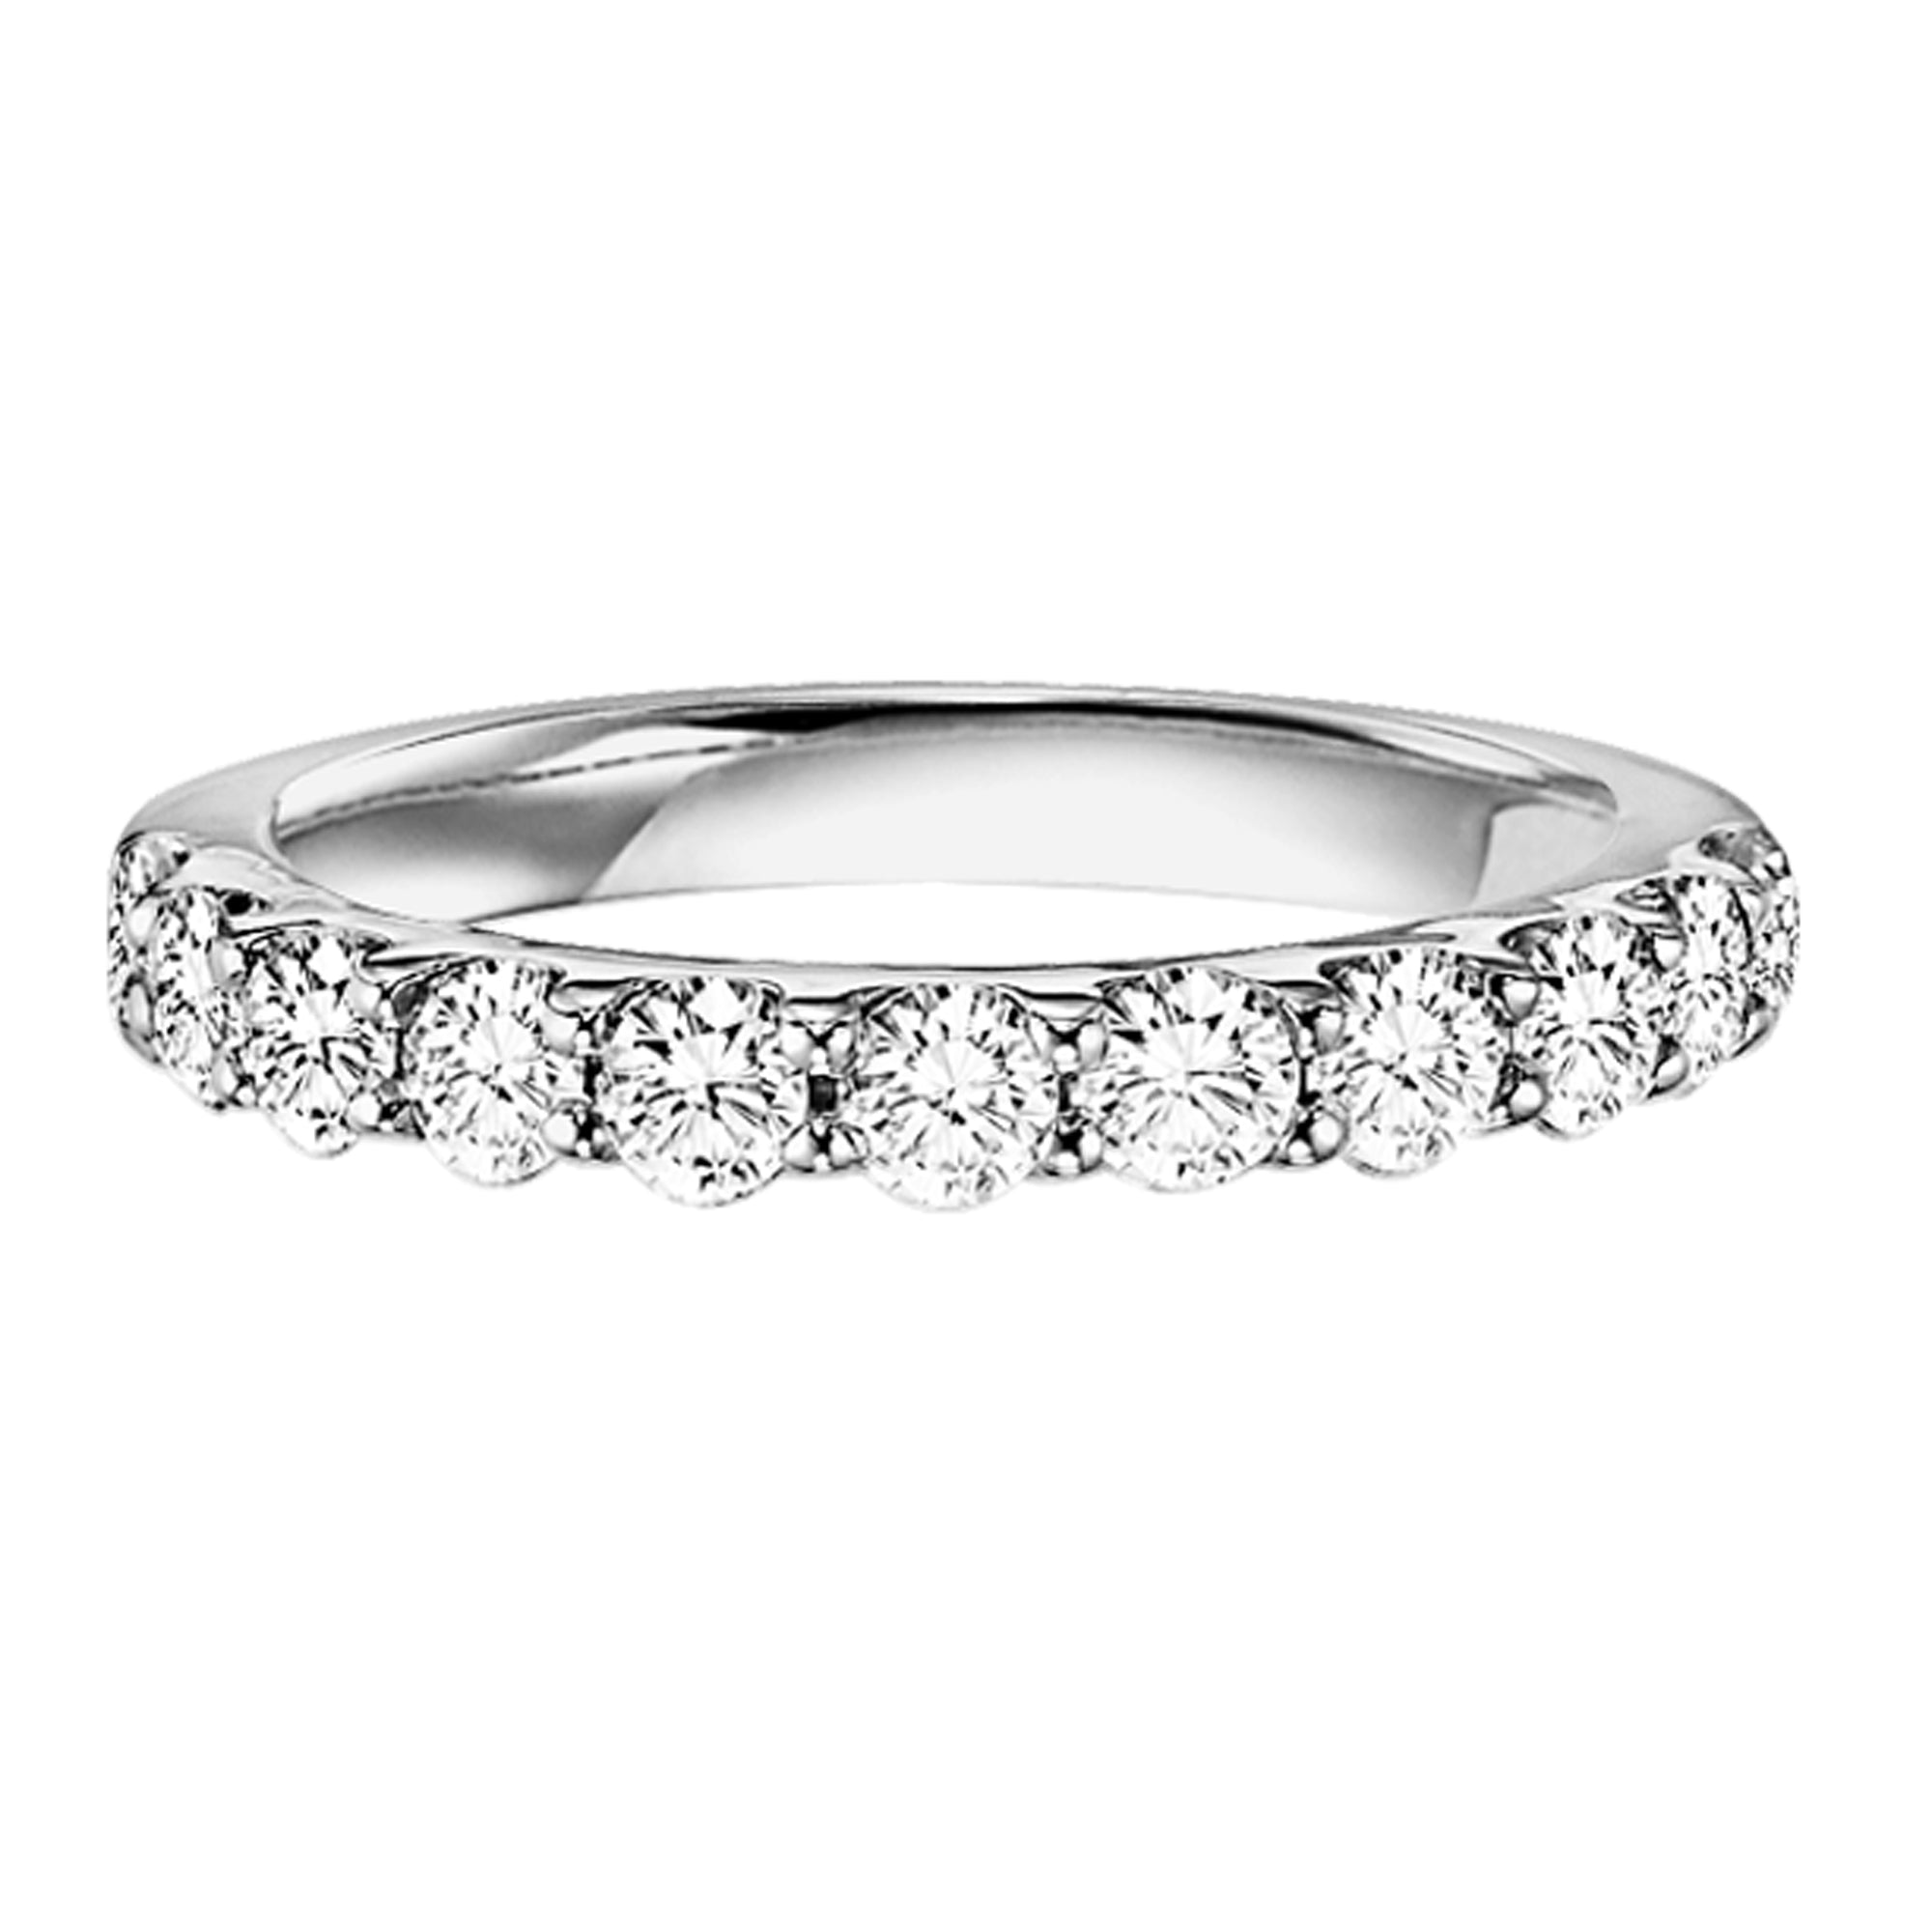 Sterling Silver Cubic Zirconia Ring - AK1015 - Hallmark Jewellers Formby & The Jewellers Bench Widnes